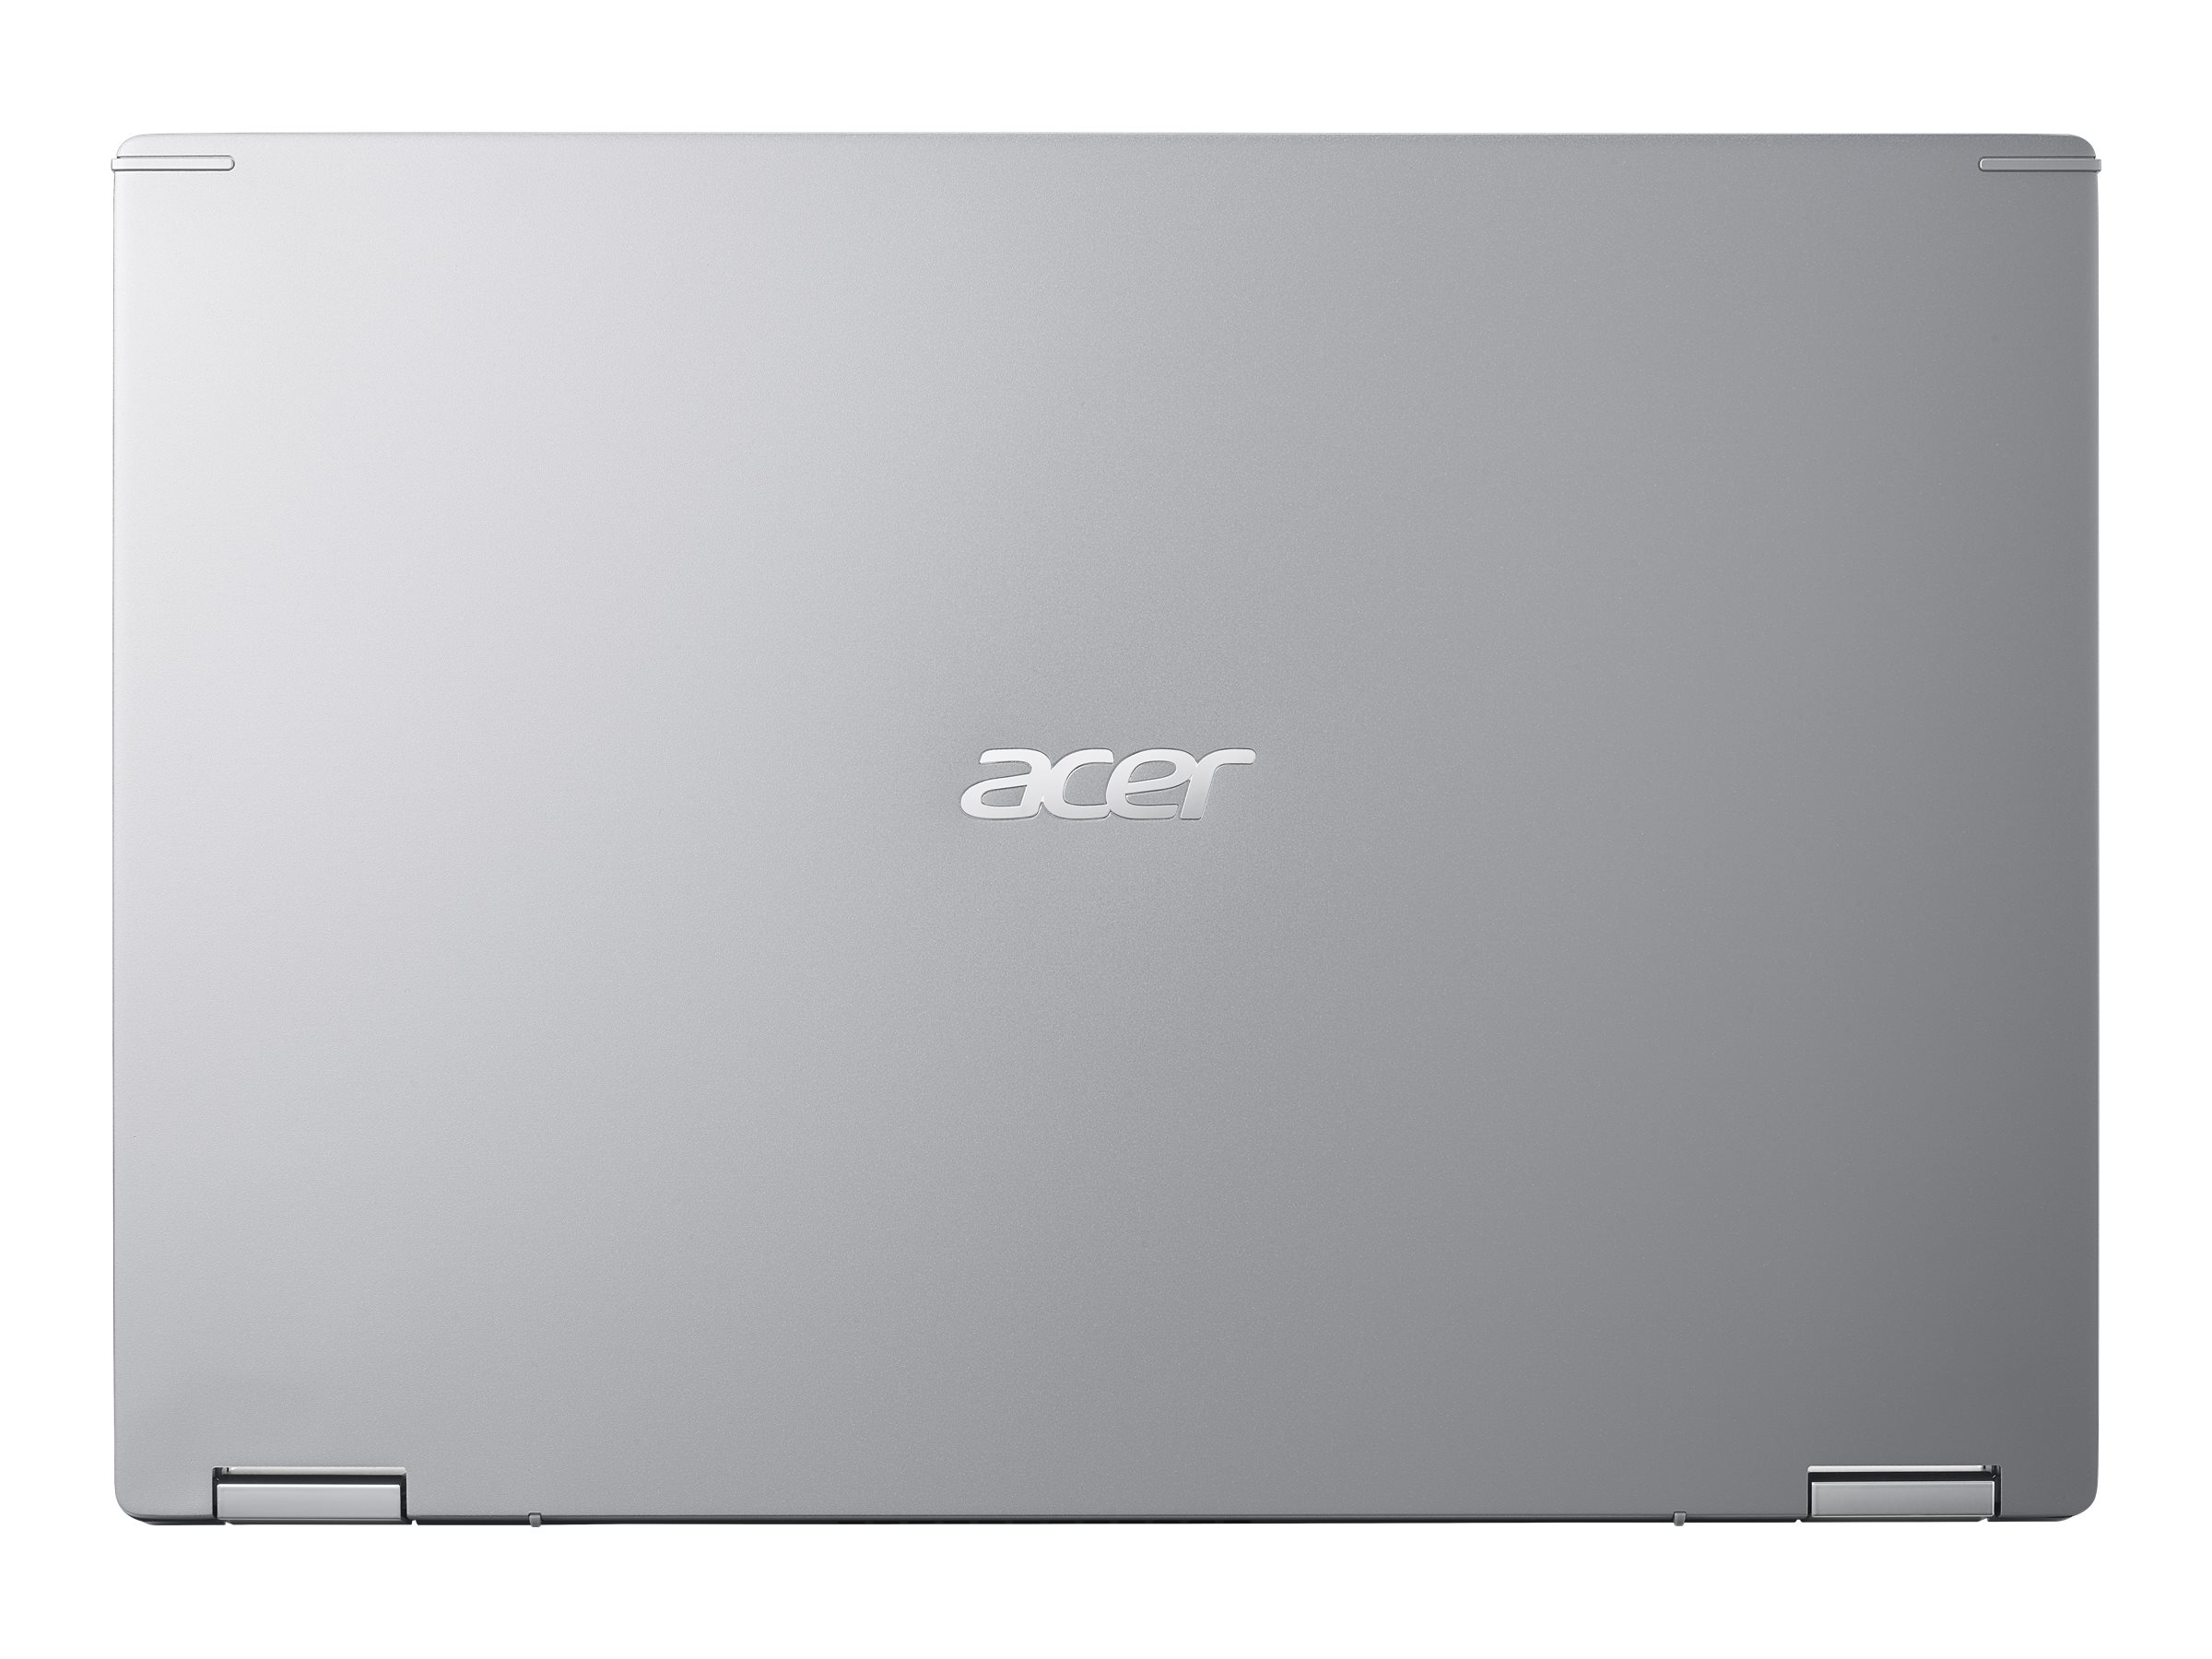 Acer Spin 3, 14.0" Full HD IPS Touch, Thunderbolt 3, Convertible, 10th Gen Intel Core i5-1035G1, 8GB LPDDR4, 256GB NVMe SSD, Silver, Windows 10, SP314-54N-58Q7 - image 4 of 18